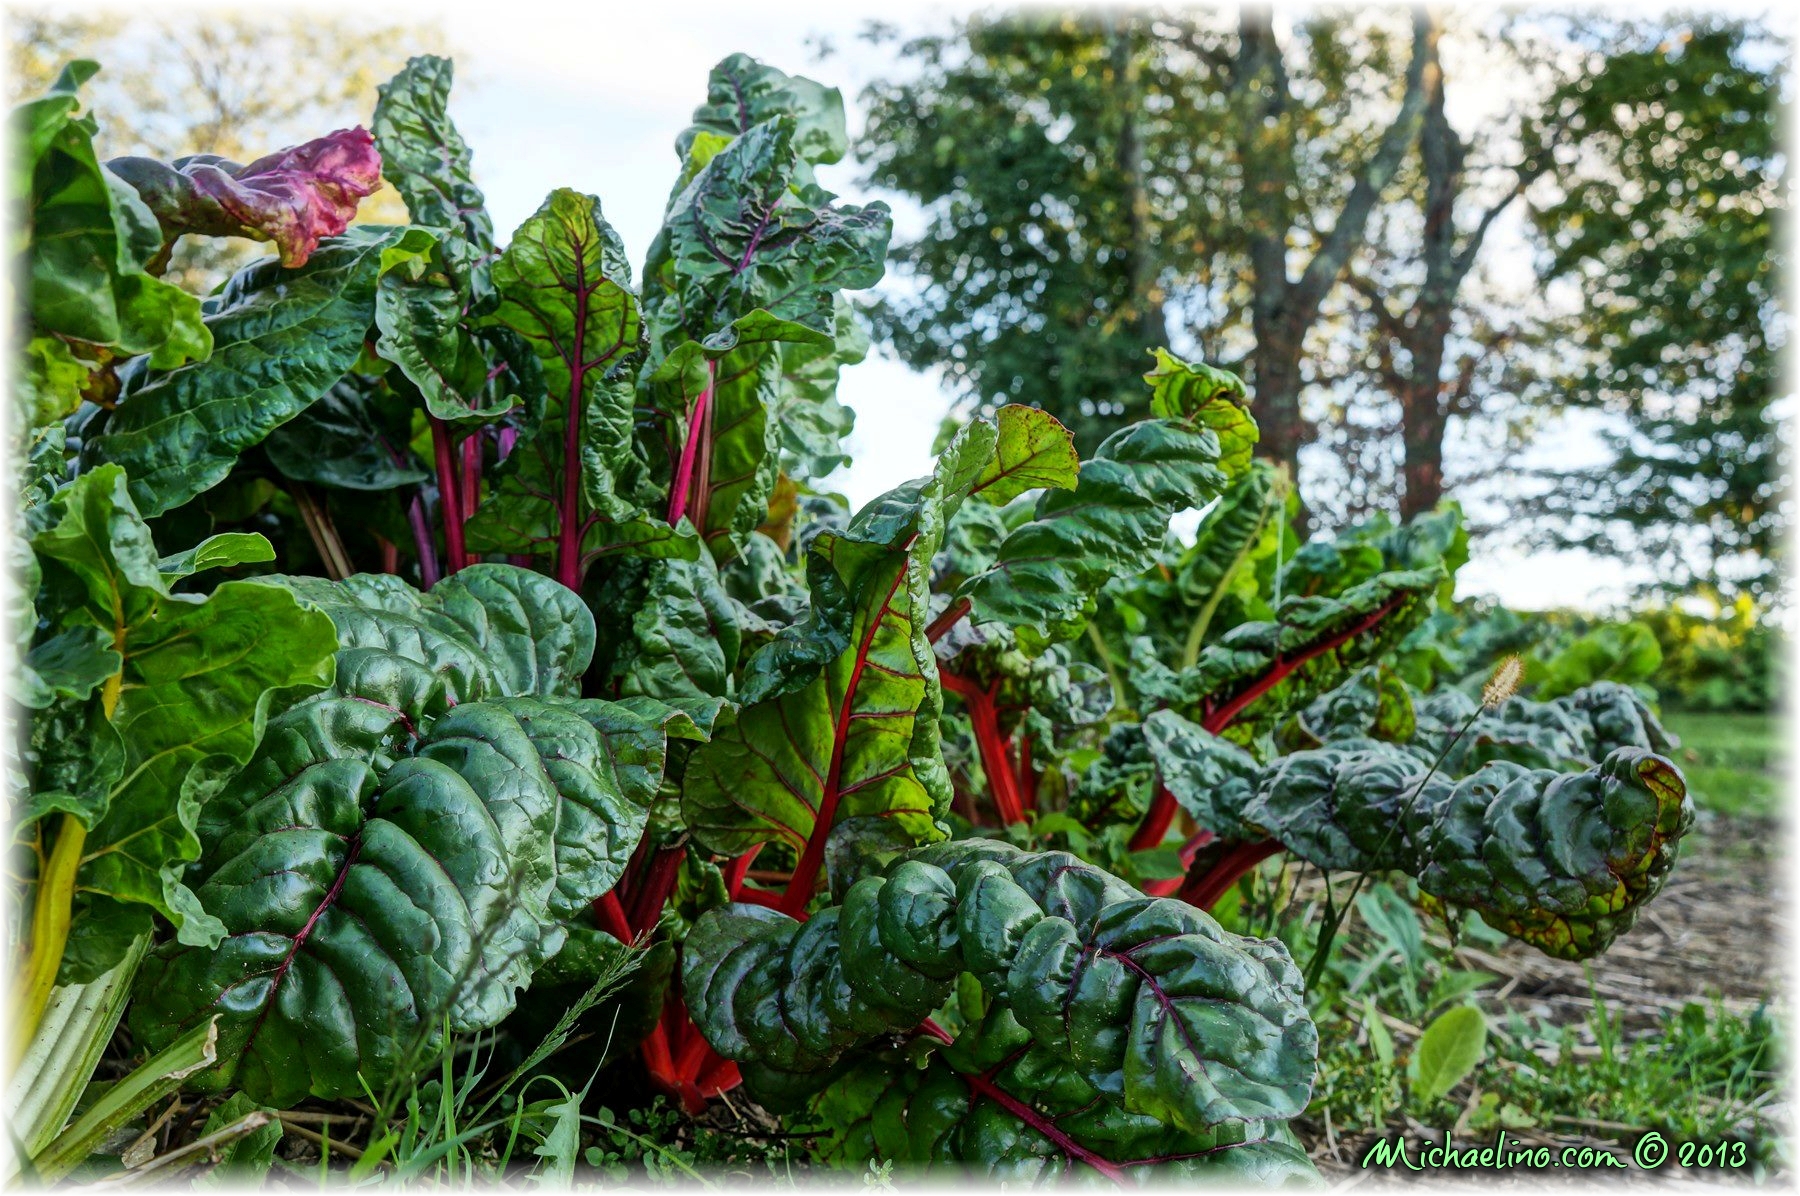 Chard on the edge of the meadow